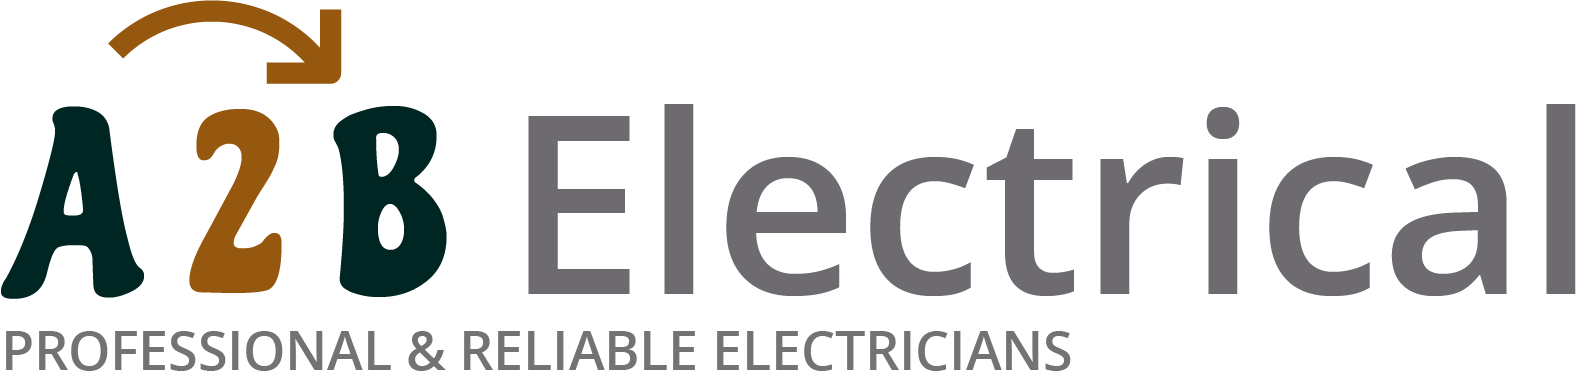 If you have electrical wiring problems in Saffron Walden, we can provide an electrician to have a look for you. 